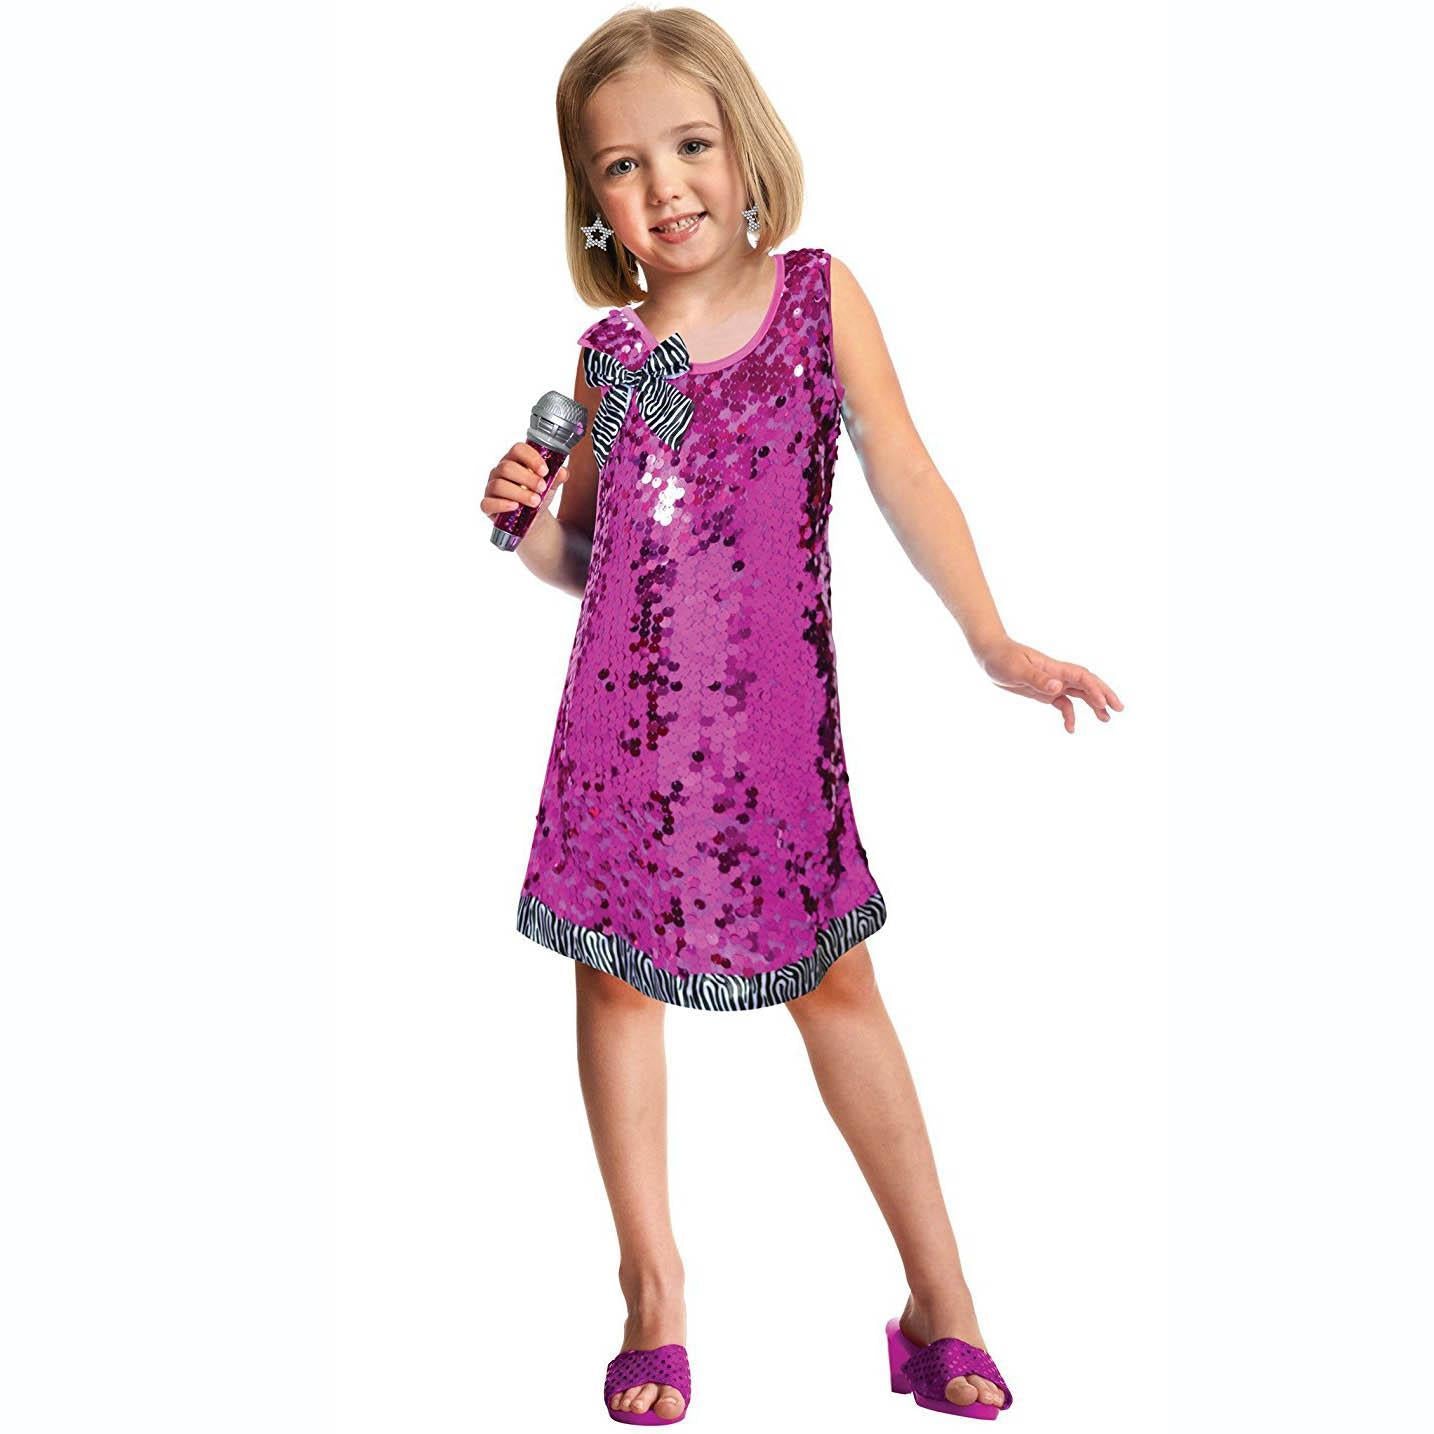 Child Popstar Costume 3-6yrs (One Size) Costumes & Apparel - Party Centre - Party Centre